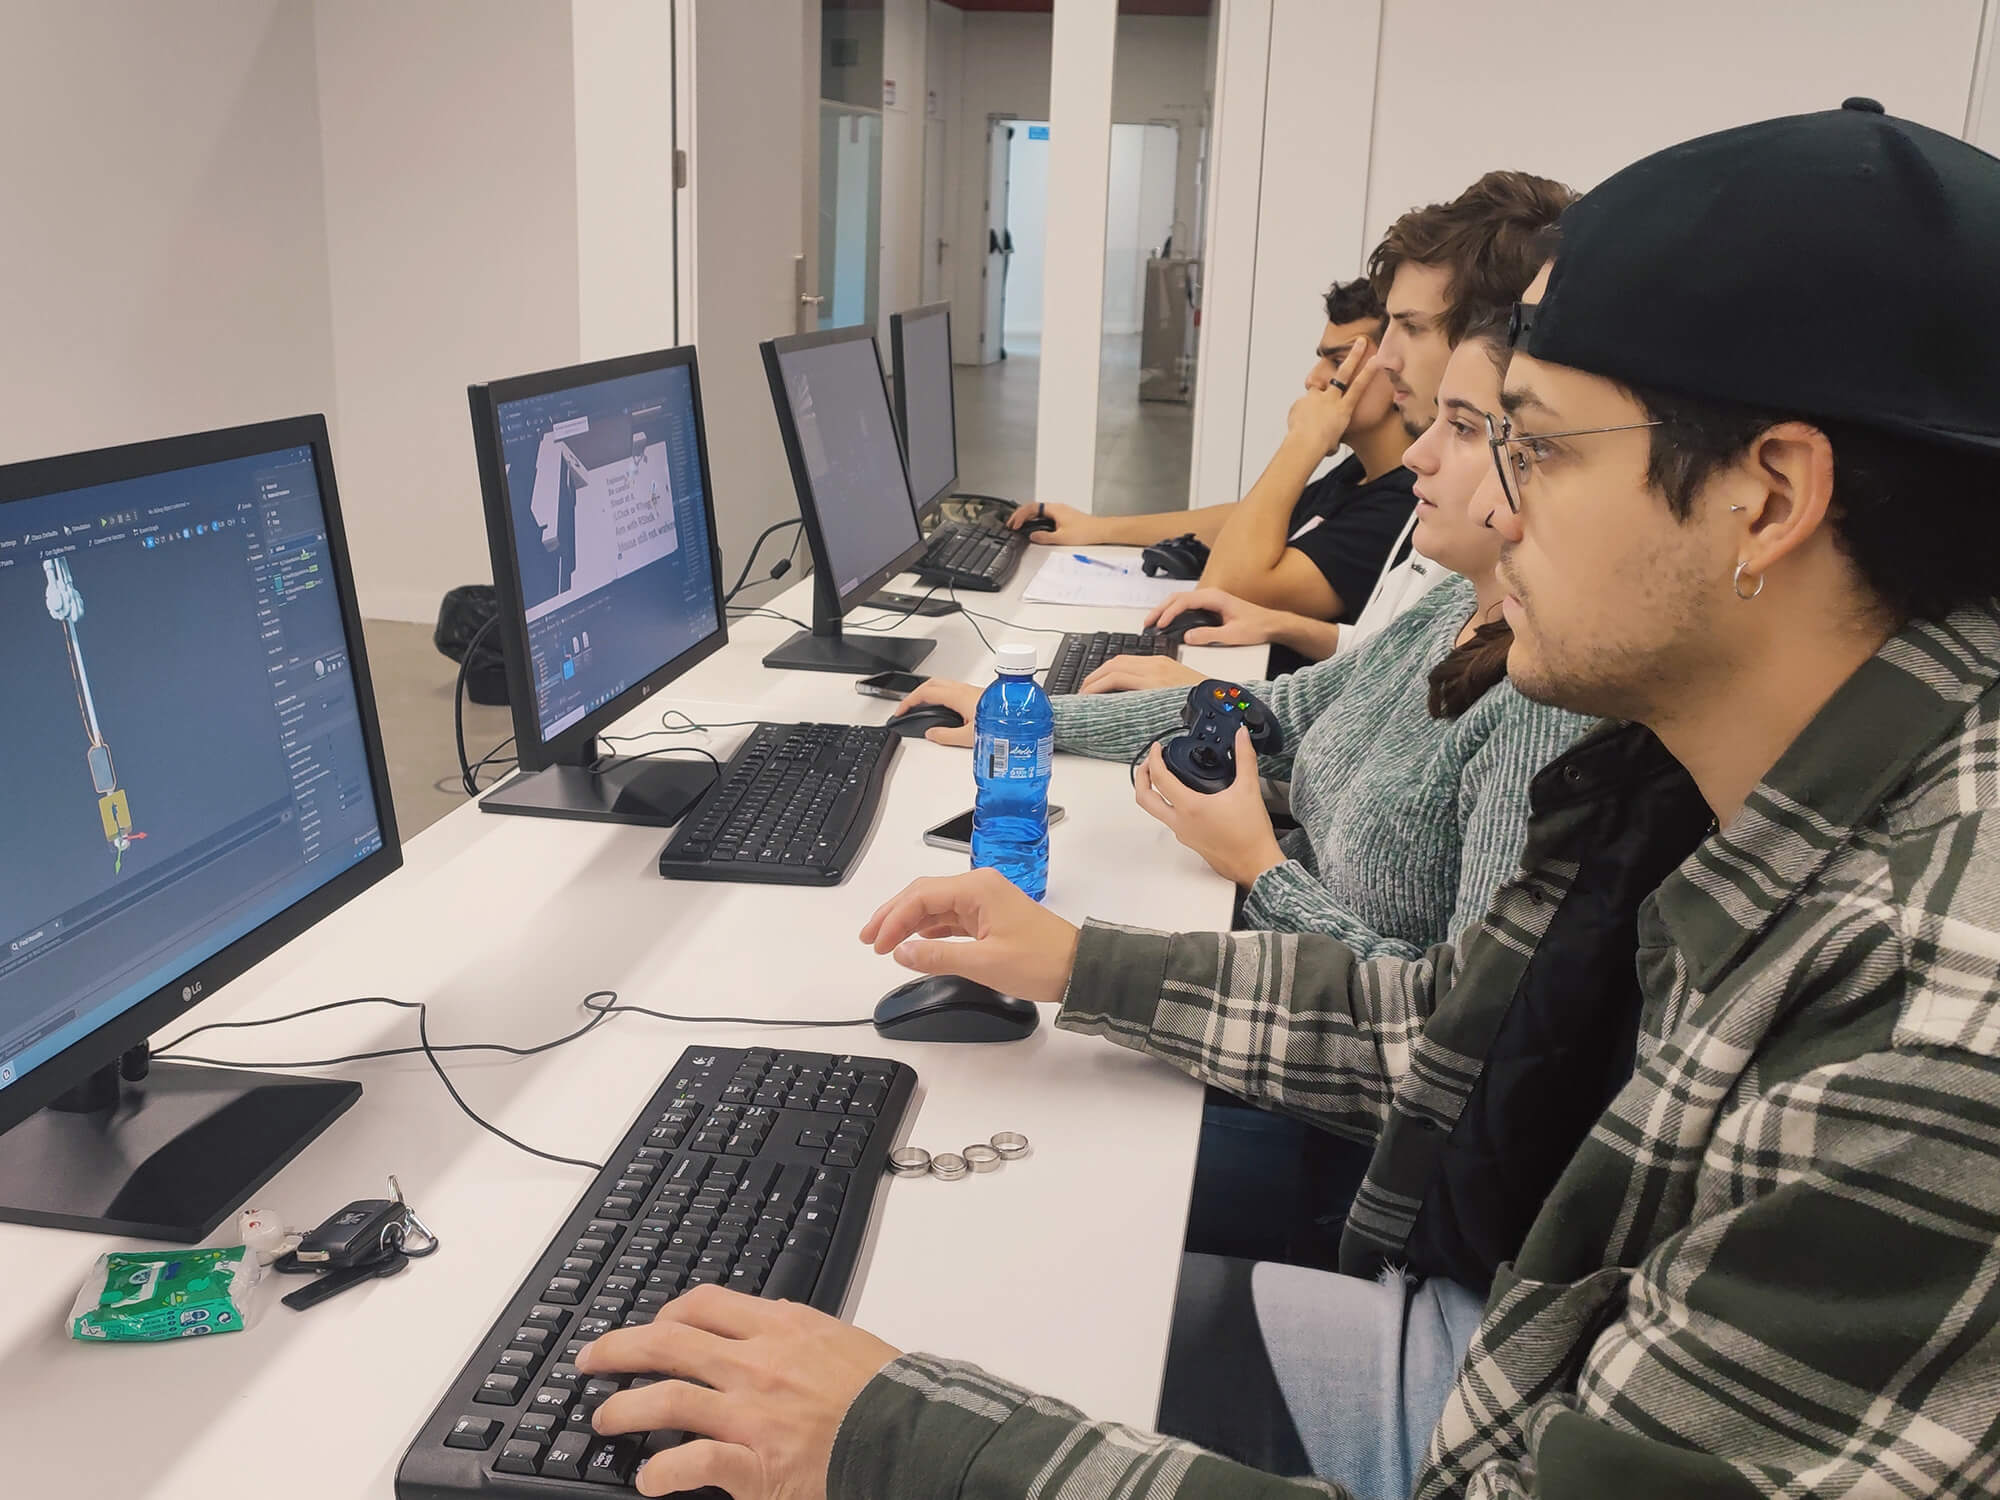 Students sit a desk and work on their game projects at their individual computers